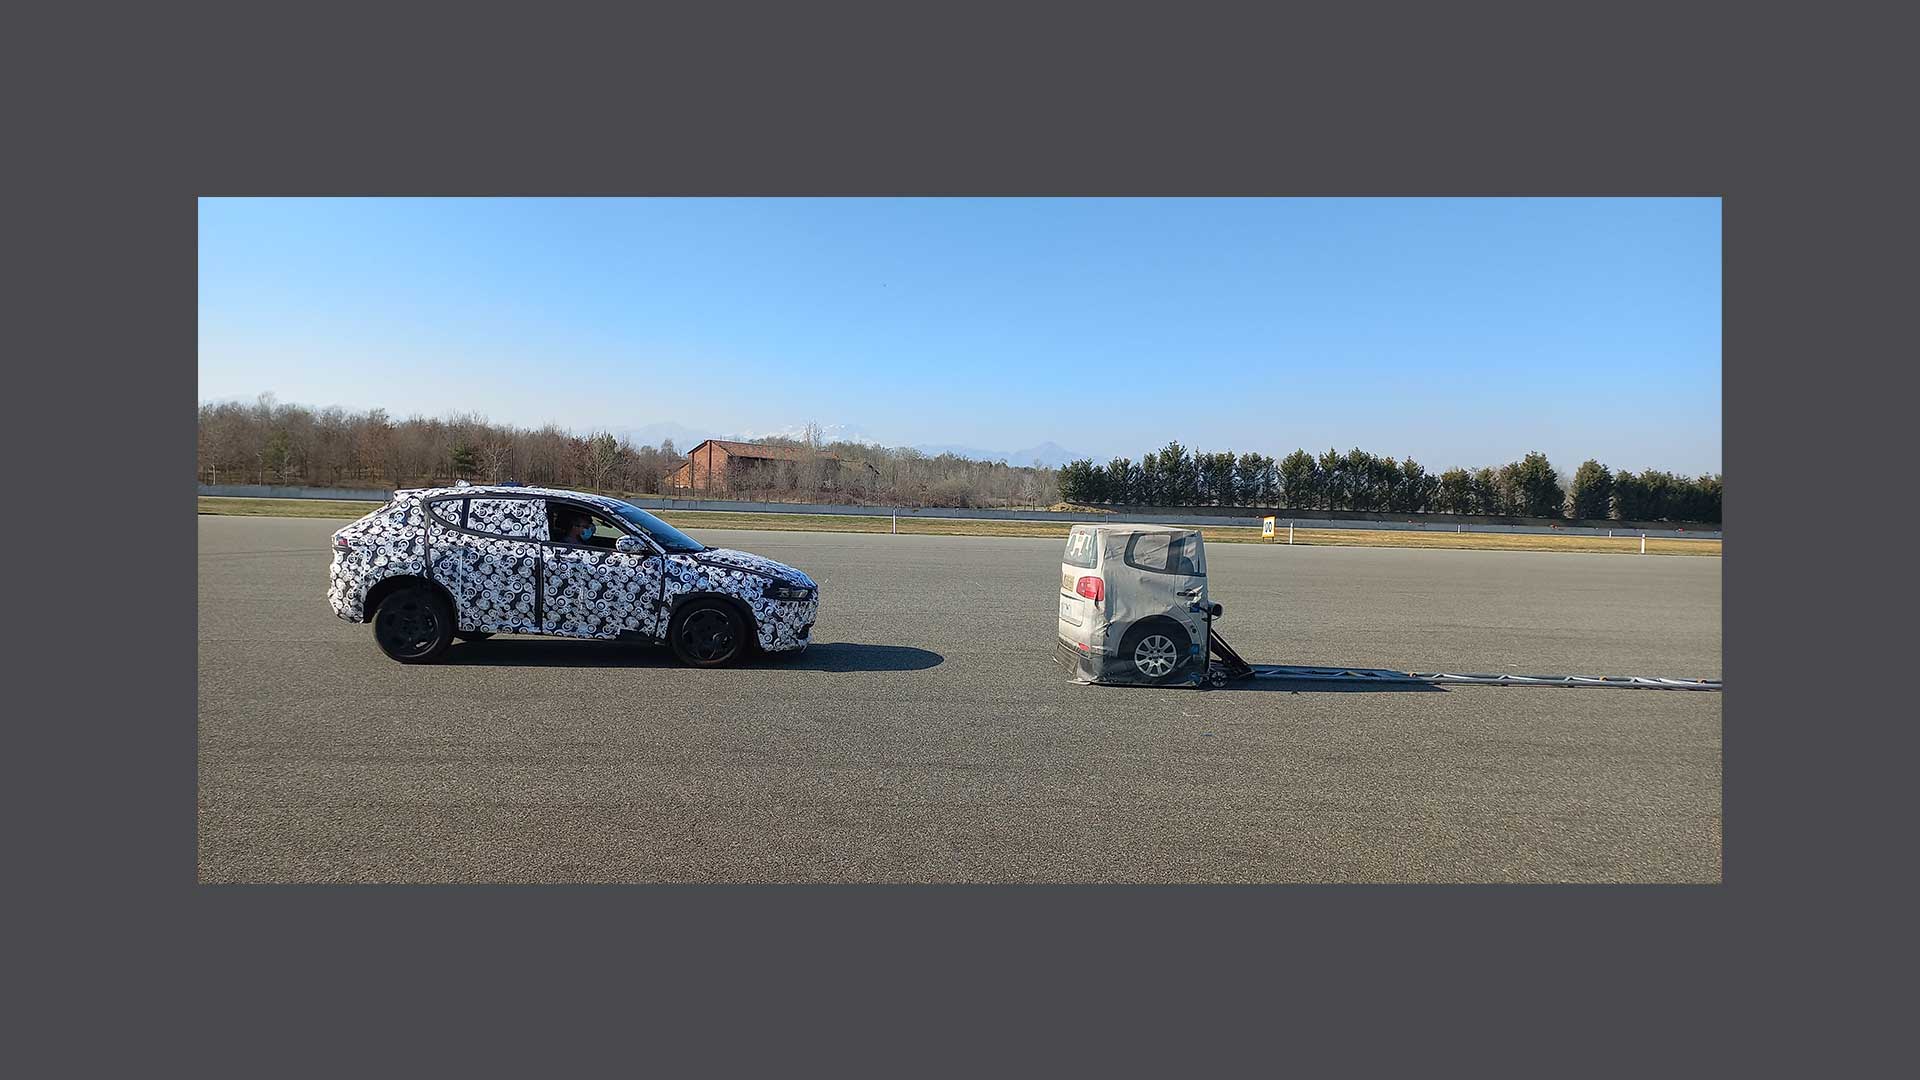 Photos of the execution of tests on a car on the track